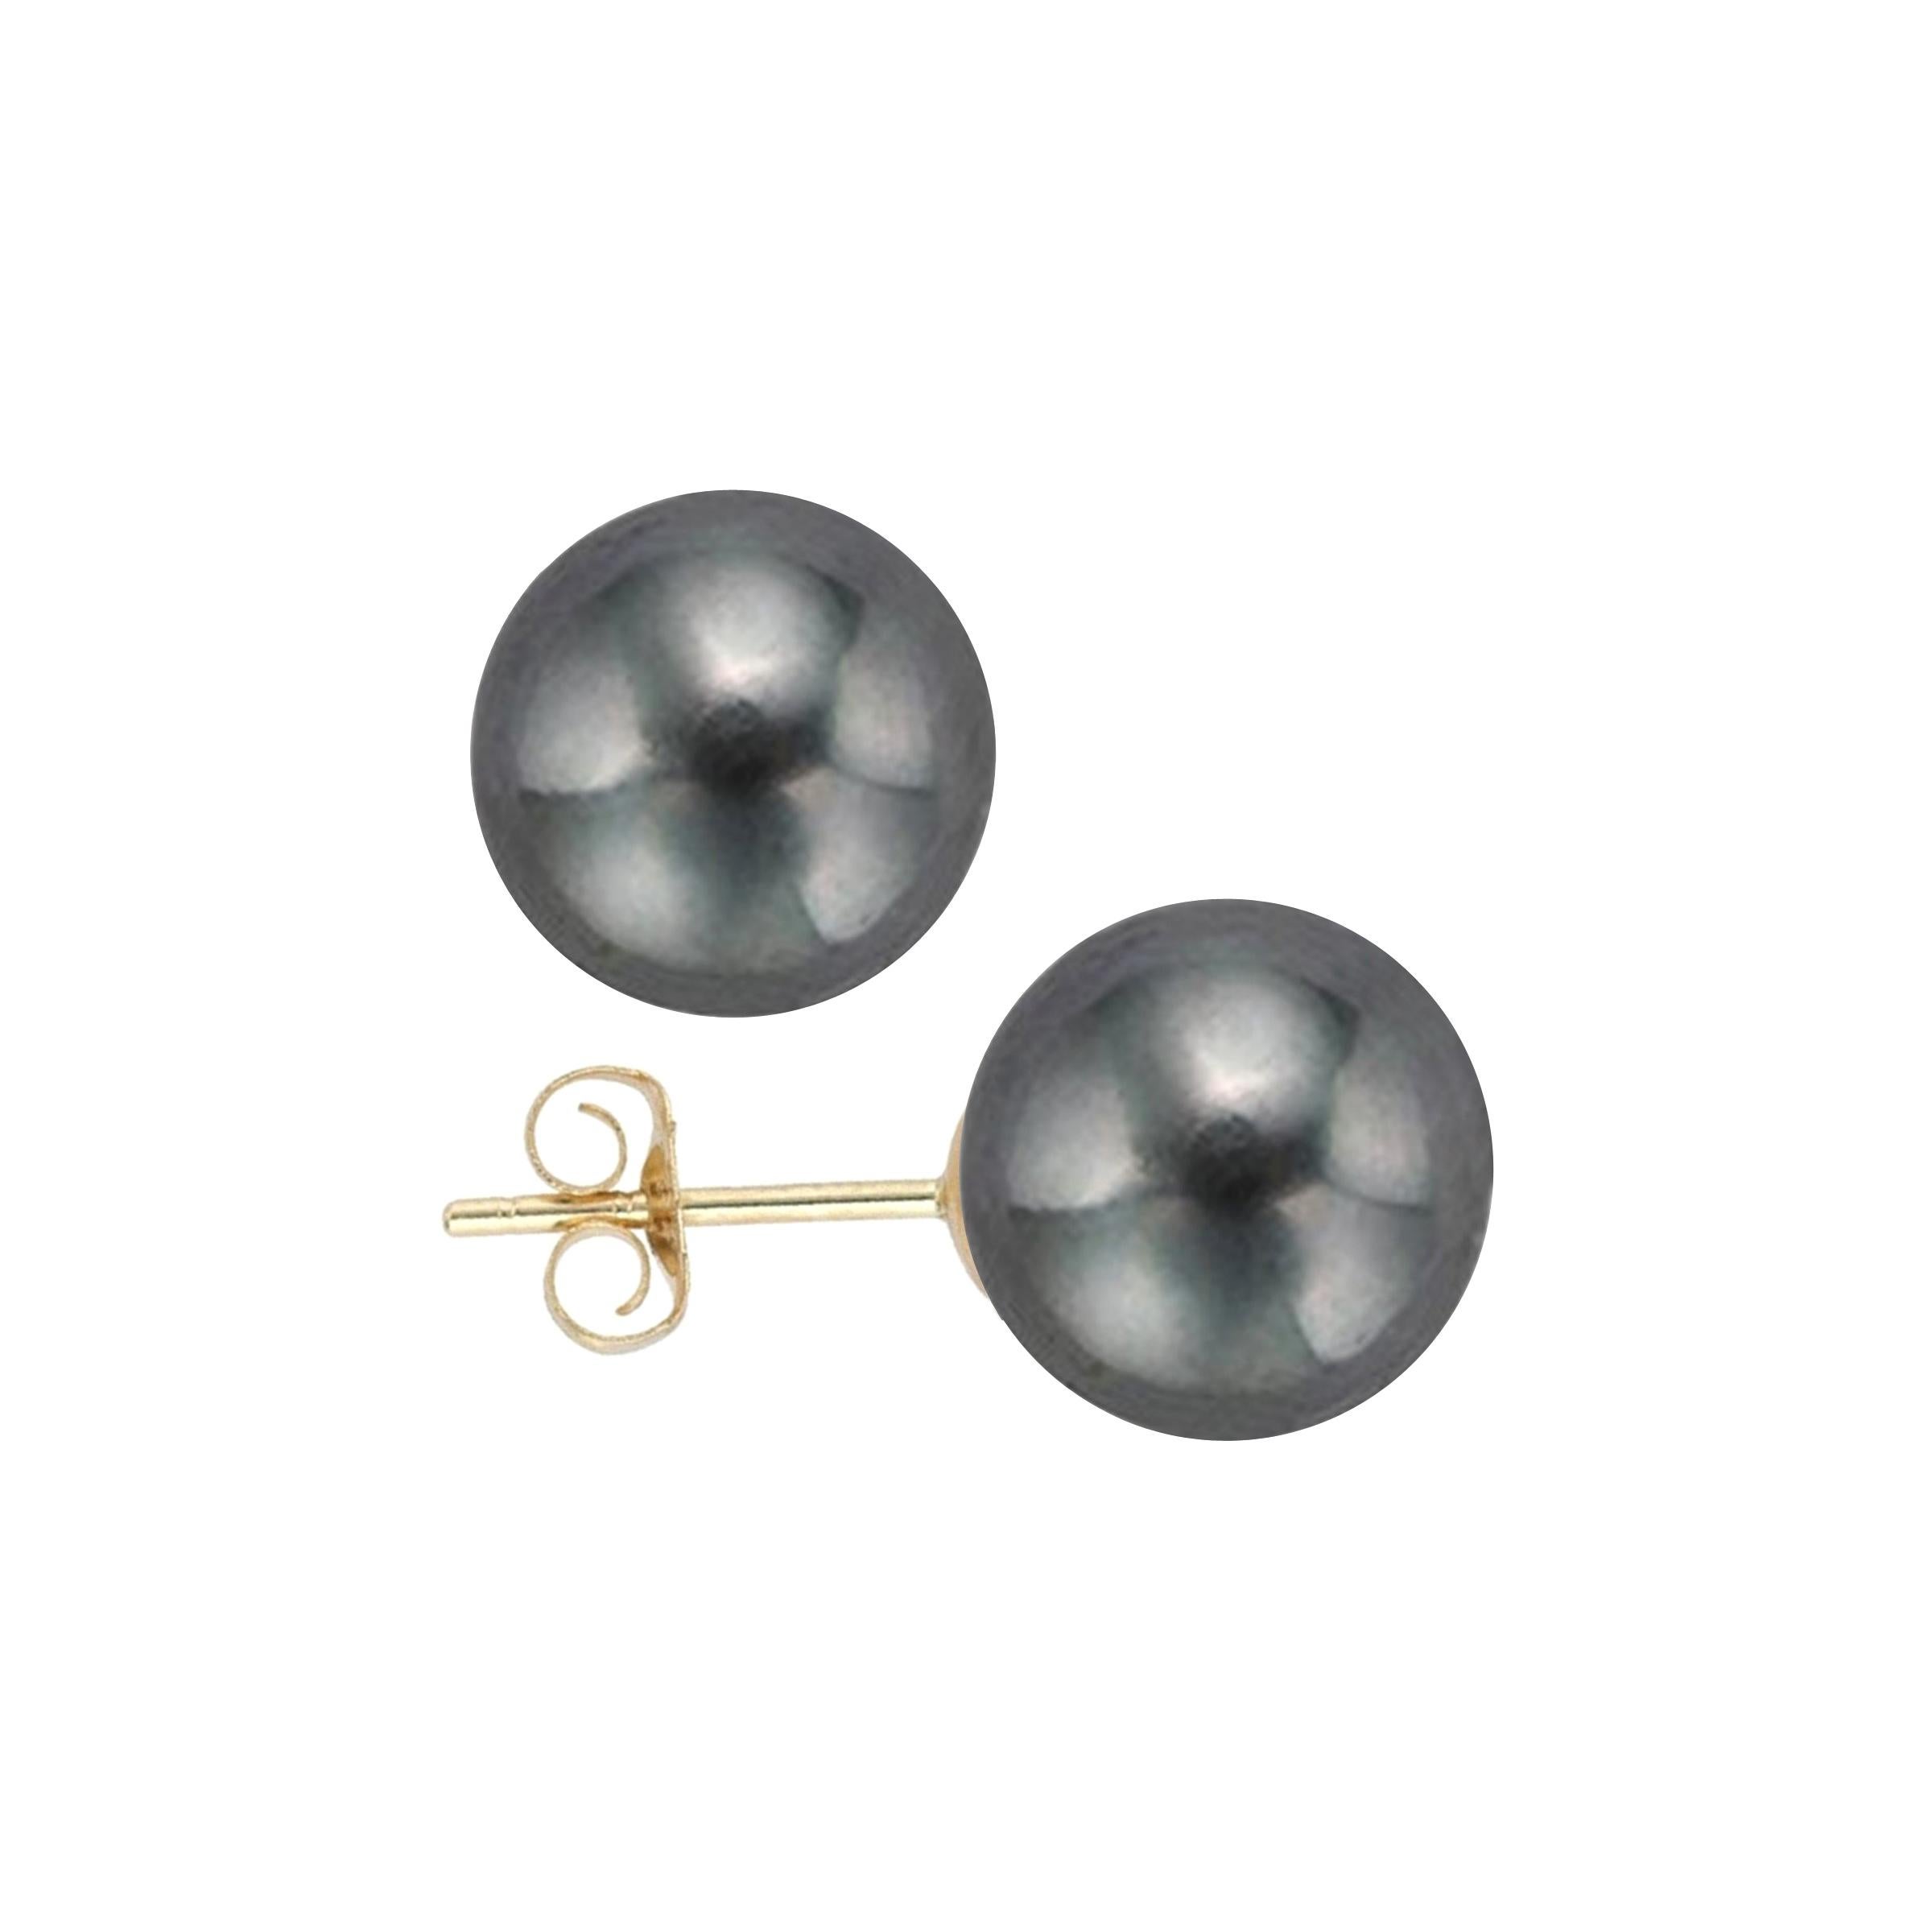 AAA Quality Black Freshwater Cultured Pearl Earring Stud on 14 Karat Yellow Gold For Sale